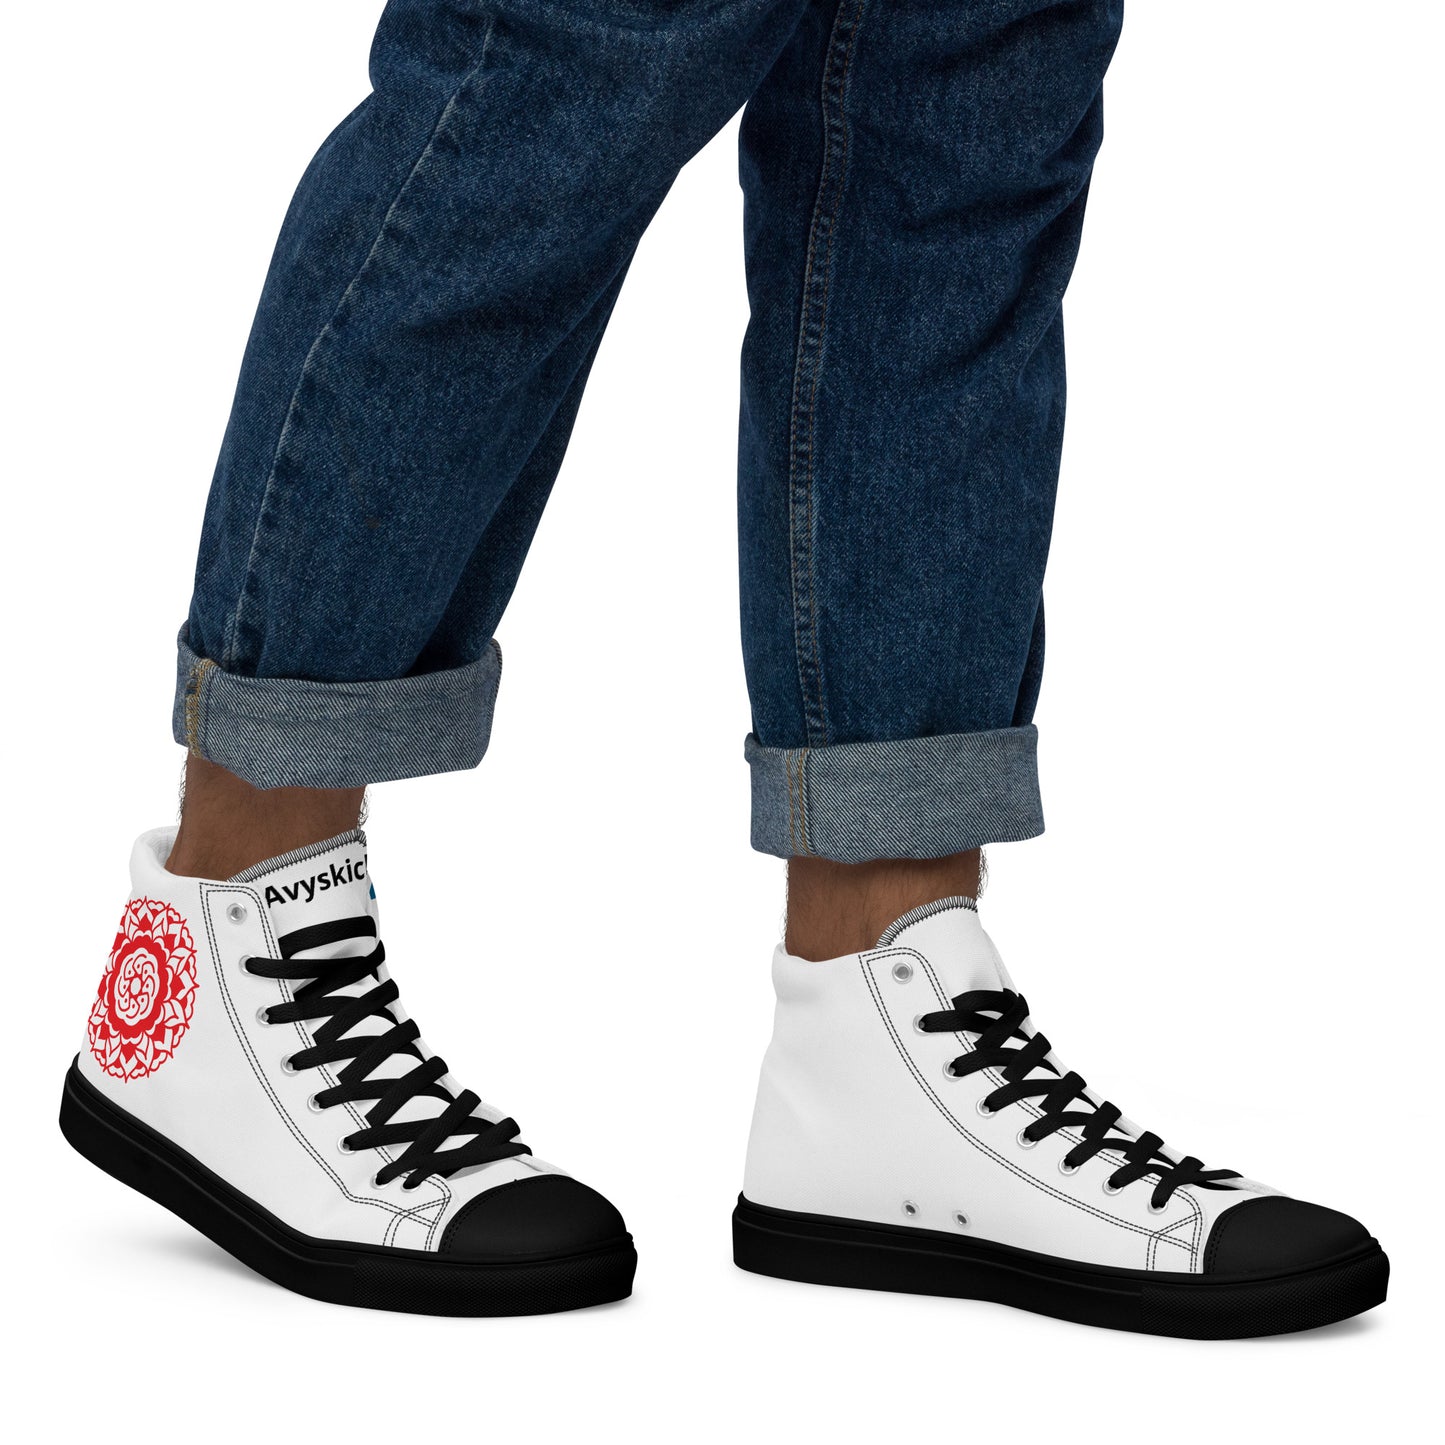 FREE SHIPPING - Men’s high top canvas shoes